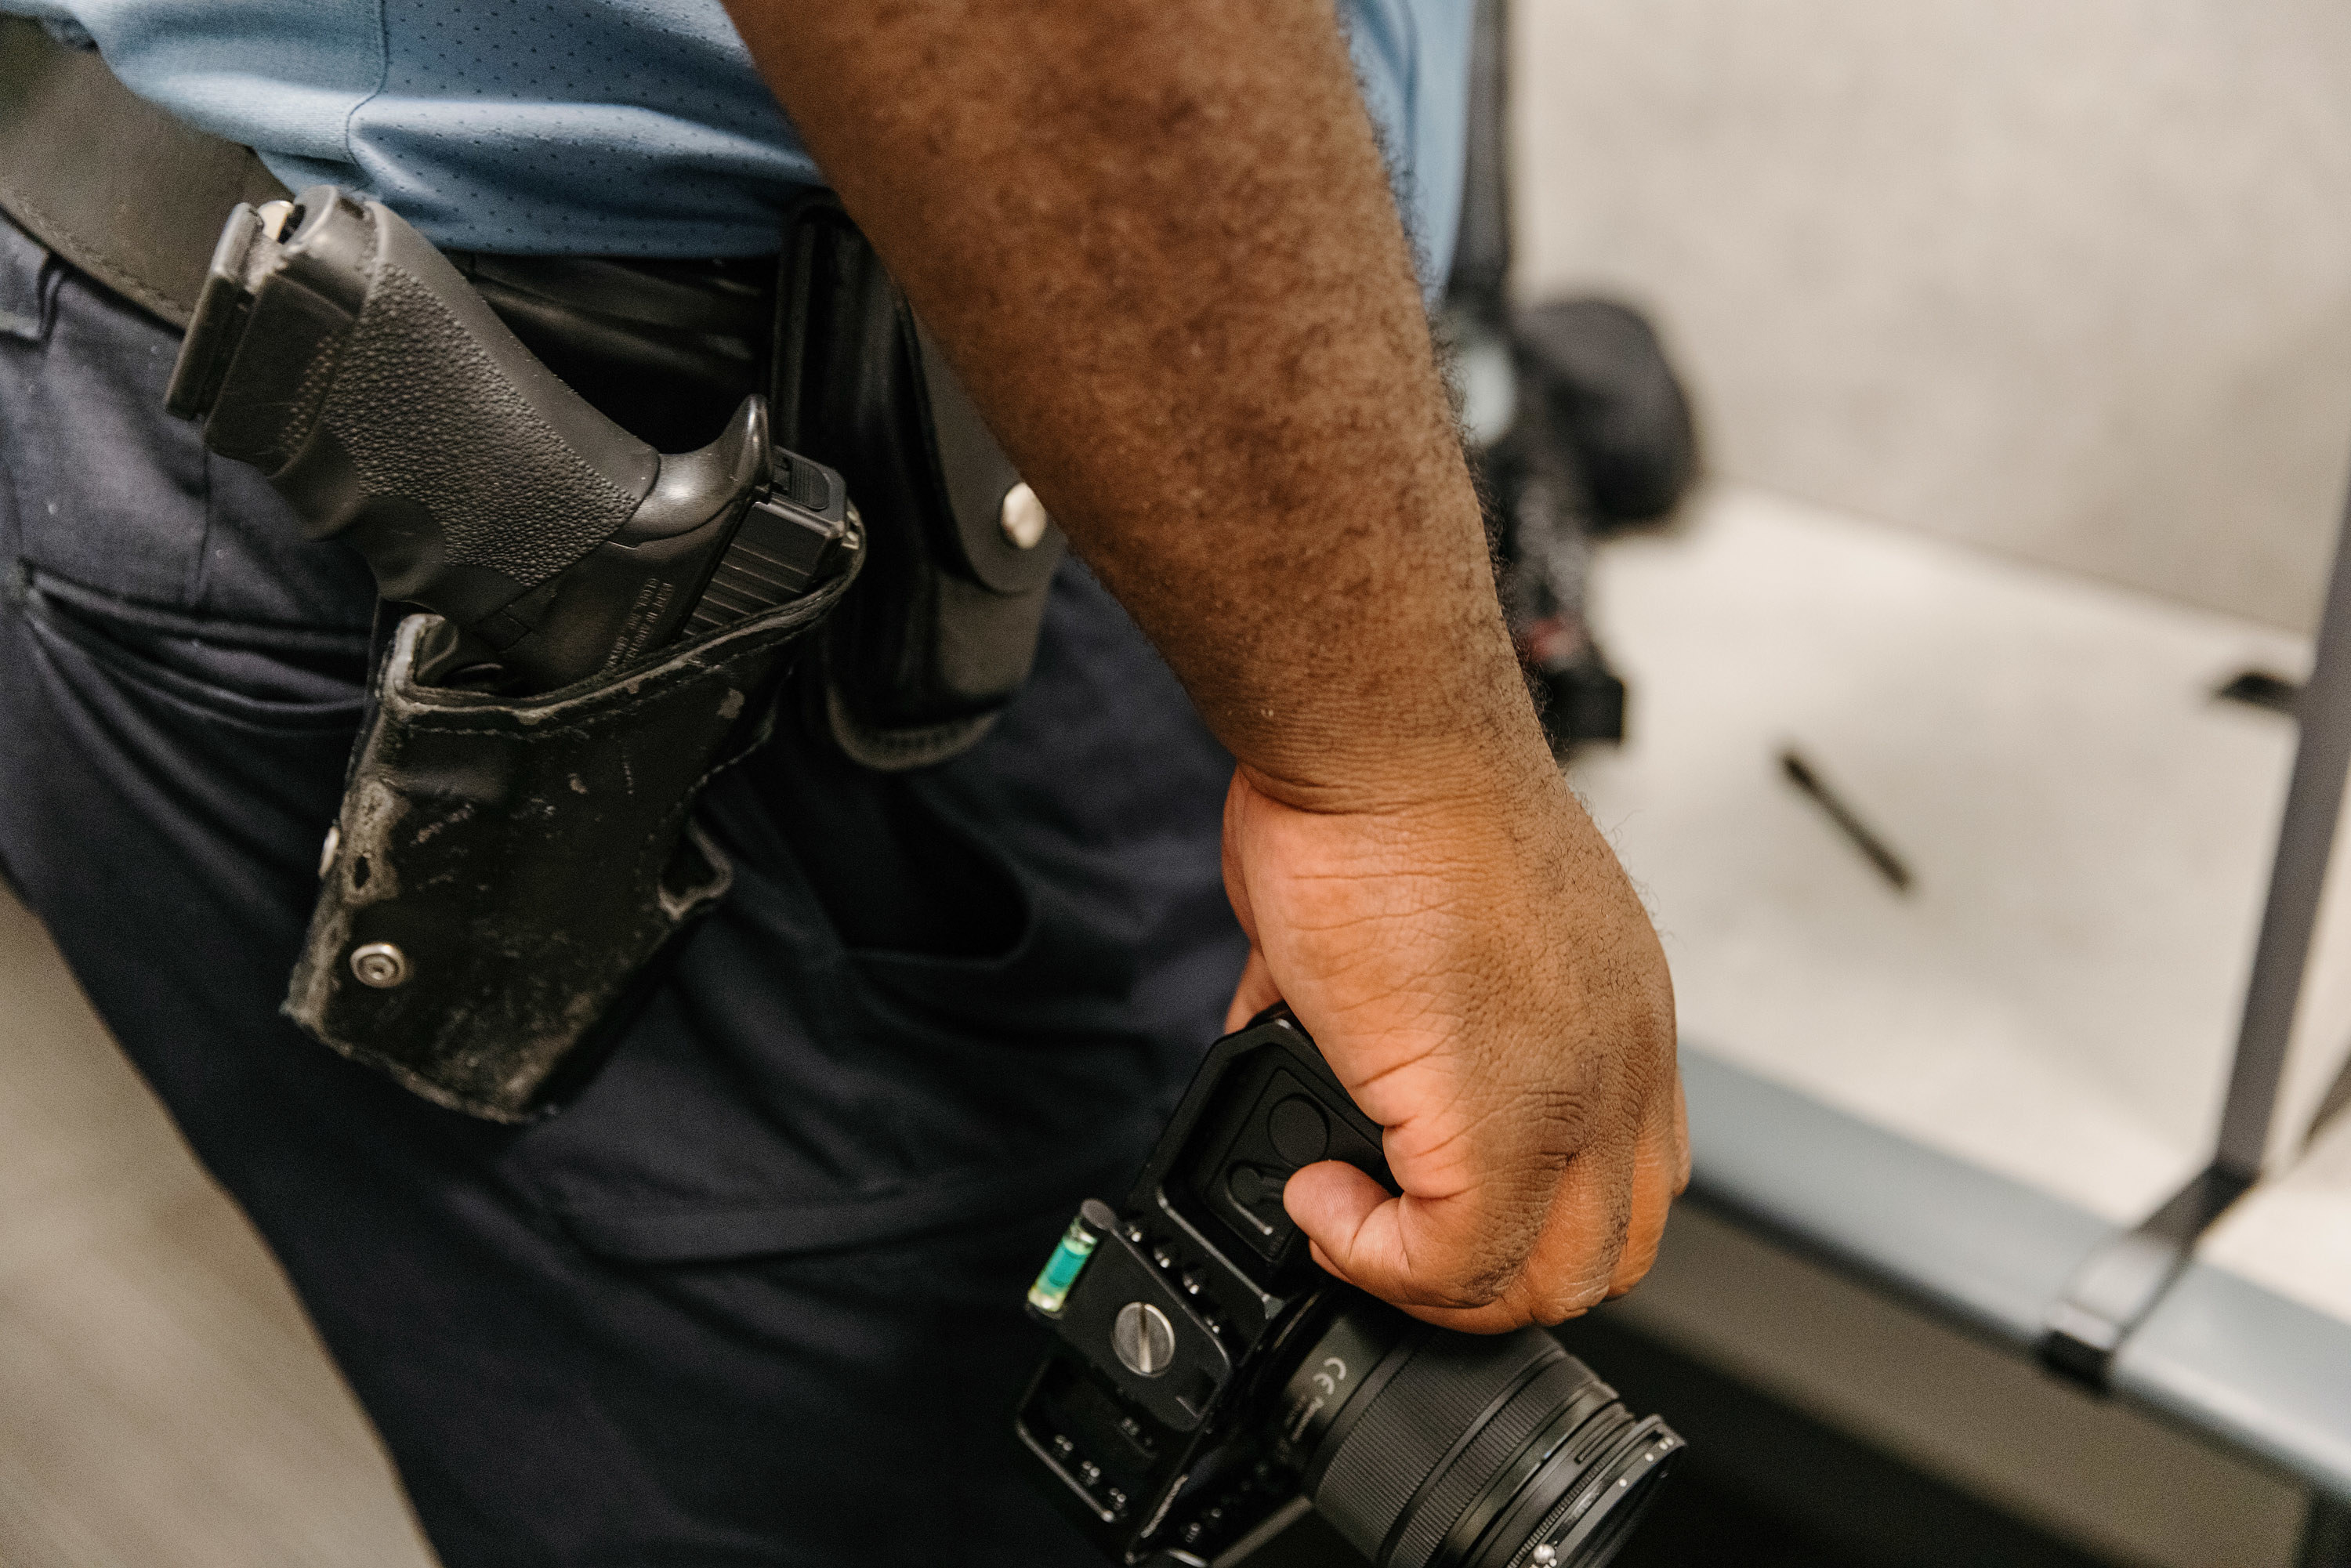 A police officer holds a digital camera near the gun holster on his waist